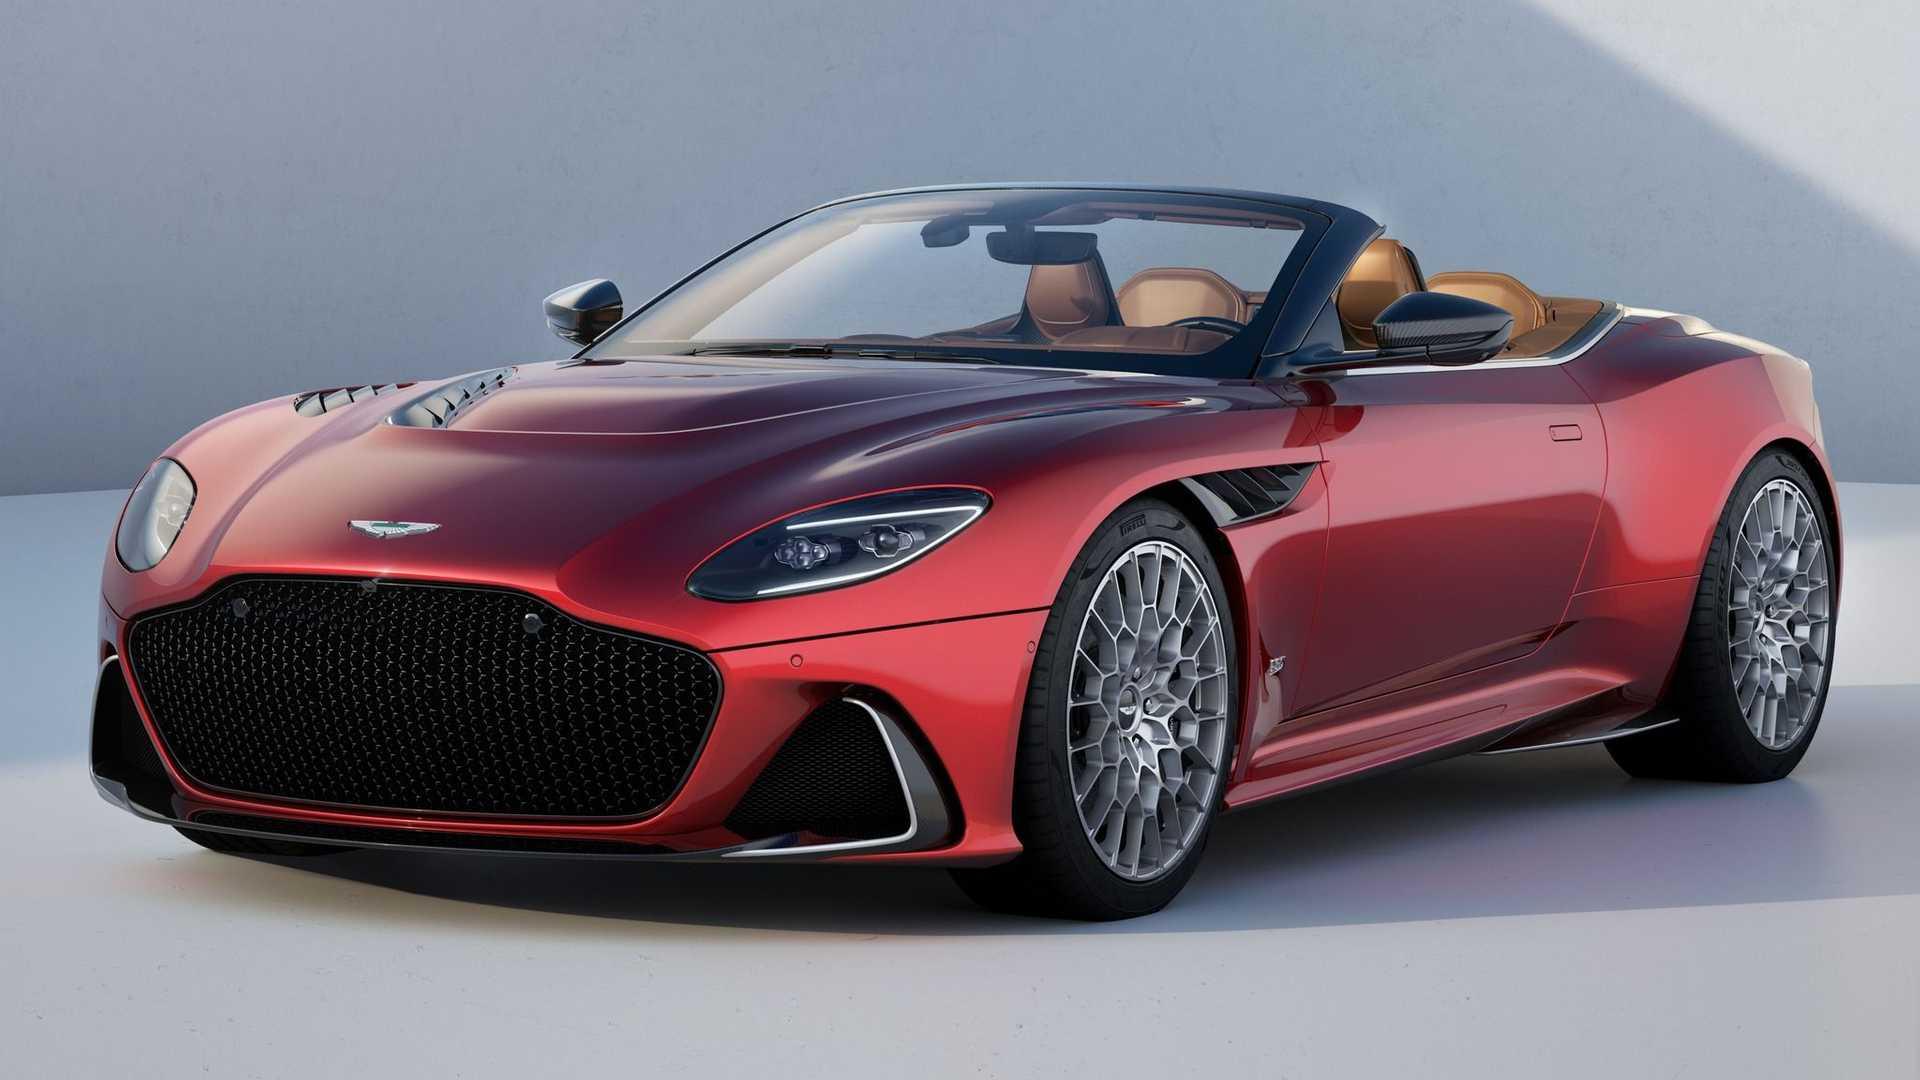 The Aston Martin DBS 770 Ultimate Volante: Most Powerful Road Car Ever